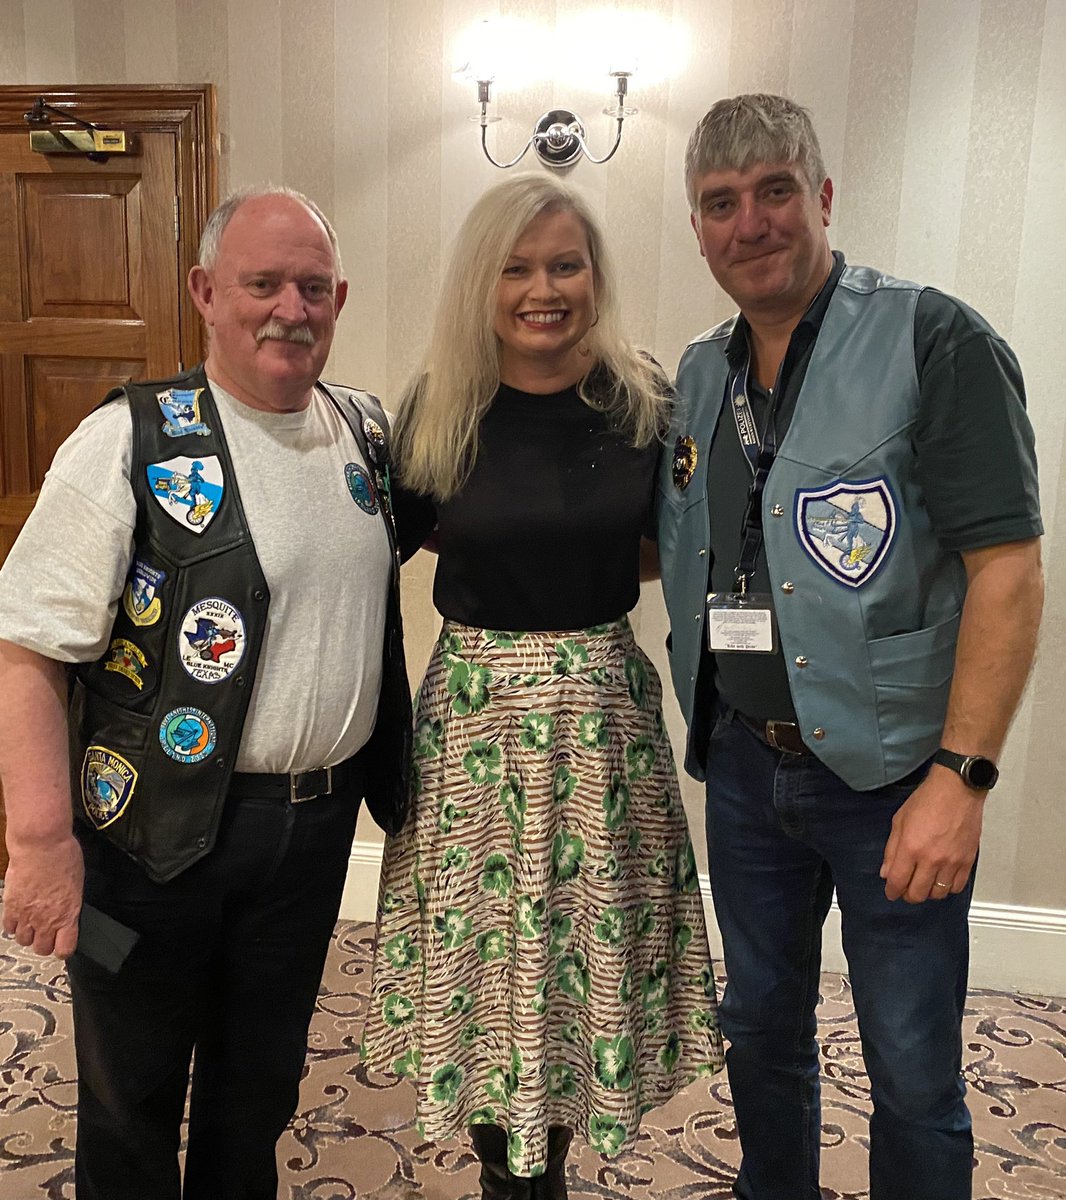 Originally scheduled for 2020 delighted to welcome Blue Knights Int’l Law Enforcement Motorcycle Club @KCCKillarney . Active & retired law enforcement officers from 🇮🇪 🏴󠁧󠁢󠁥󠁮󠁧󠁿 🏴󠁧󠁢󠁳󠁣󠁴󠁿 🏴󠁧󠁢󠁷󠁬󠁳󠁿 🇳🇴 🇧🇪 🇩🇪 🇺🇸 🇨🇦 🇦🇺 🇸🇪 🇦🇹 🇬🇬 @celtichorizon @MeetInIreland @Failte_Ireland @KCBKerry @LilBlueHeroes 🏍